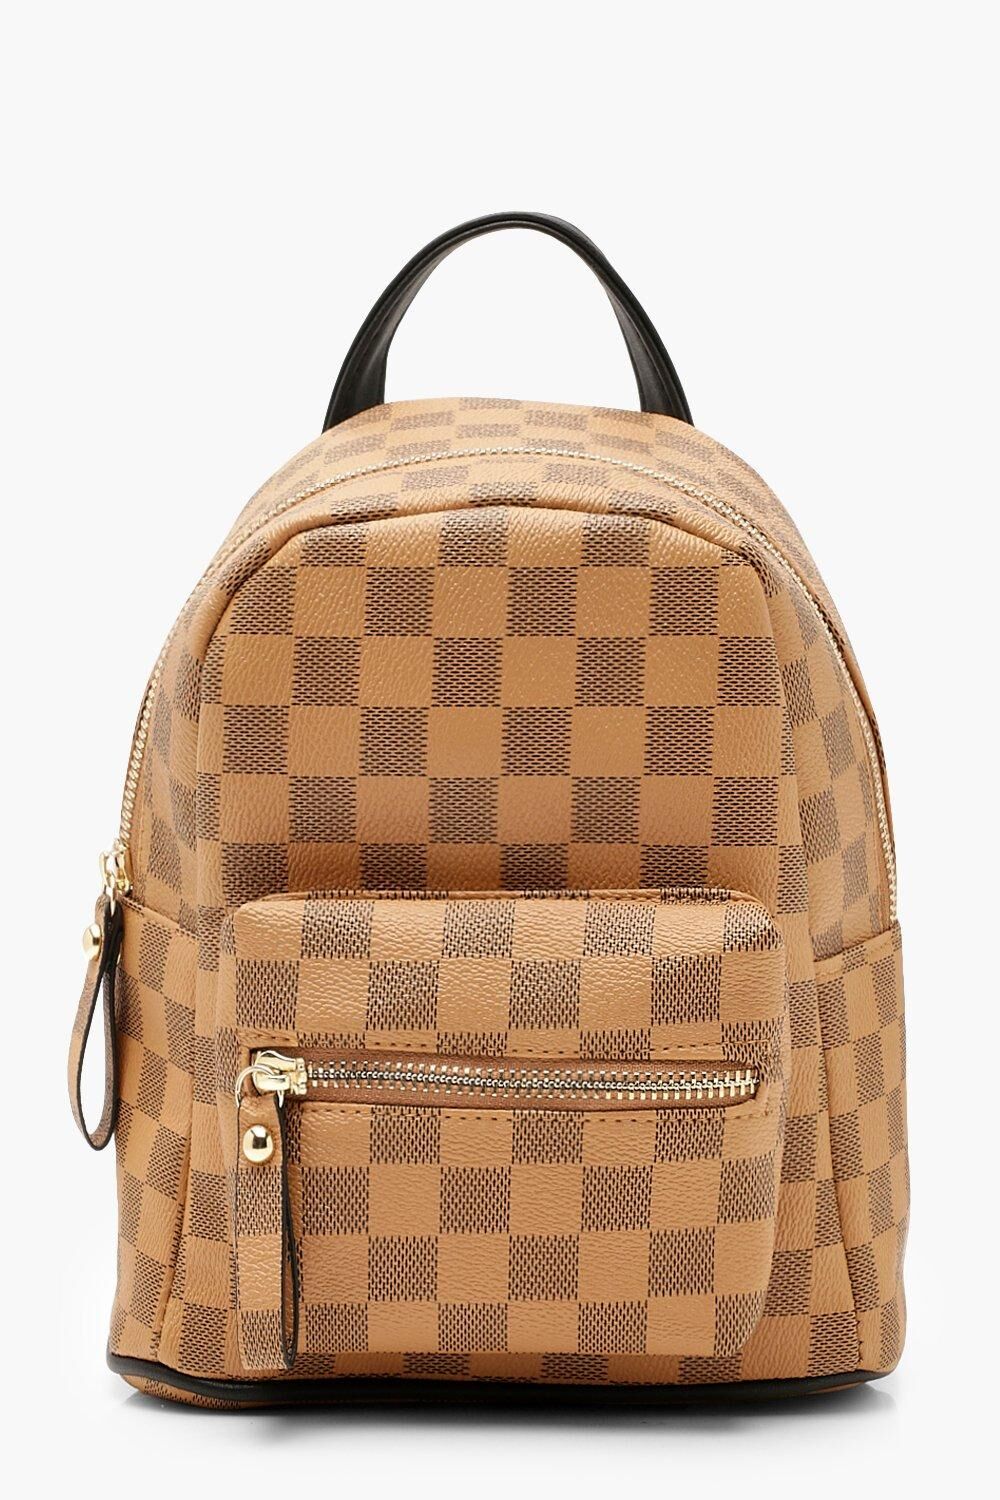 Boohoo All Over Check Mini Backpack- Brown  - Size: ONE SIZE